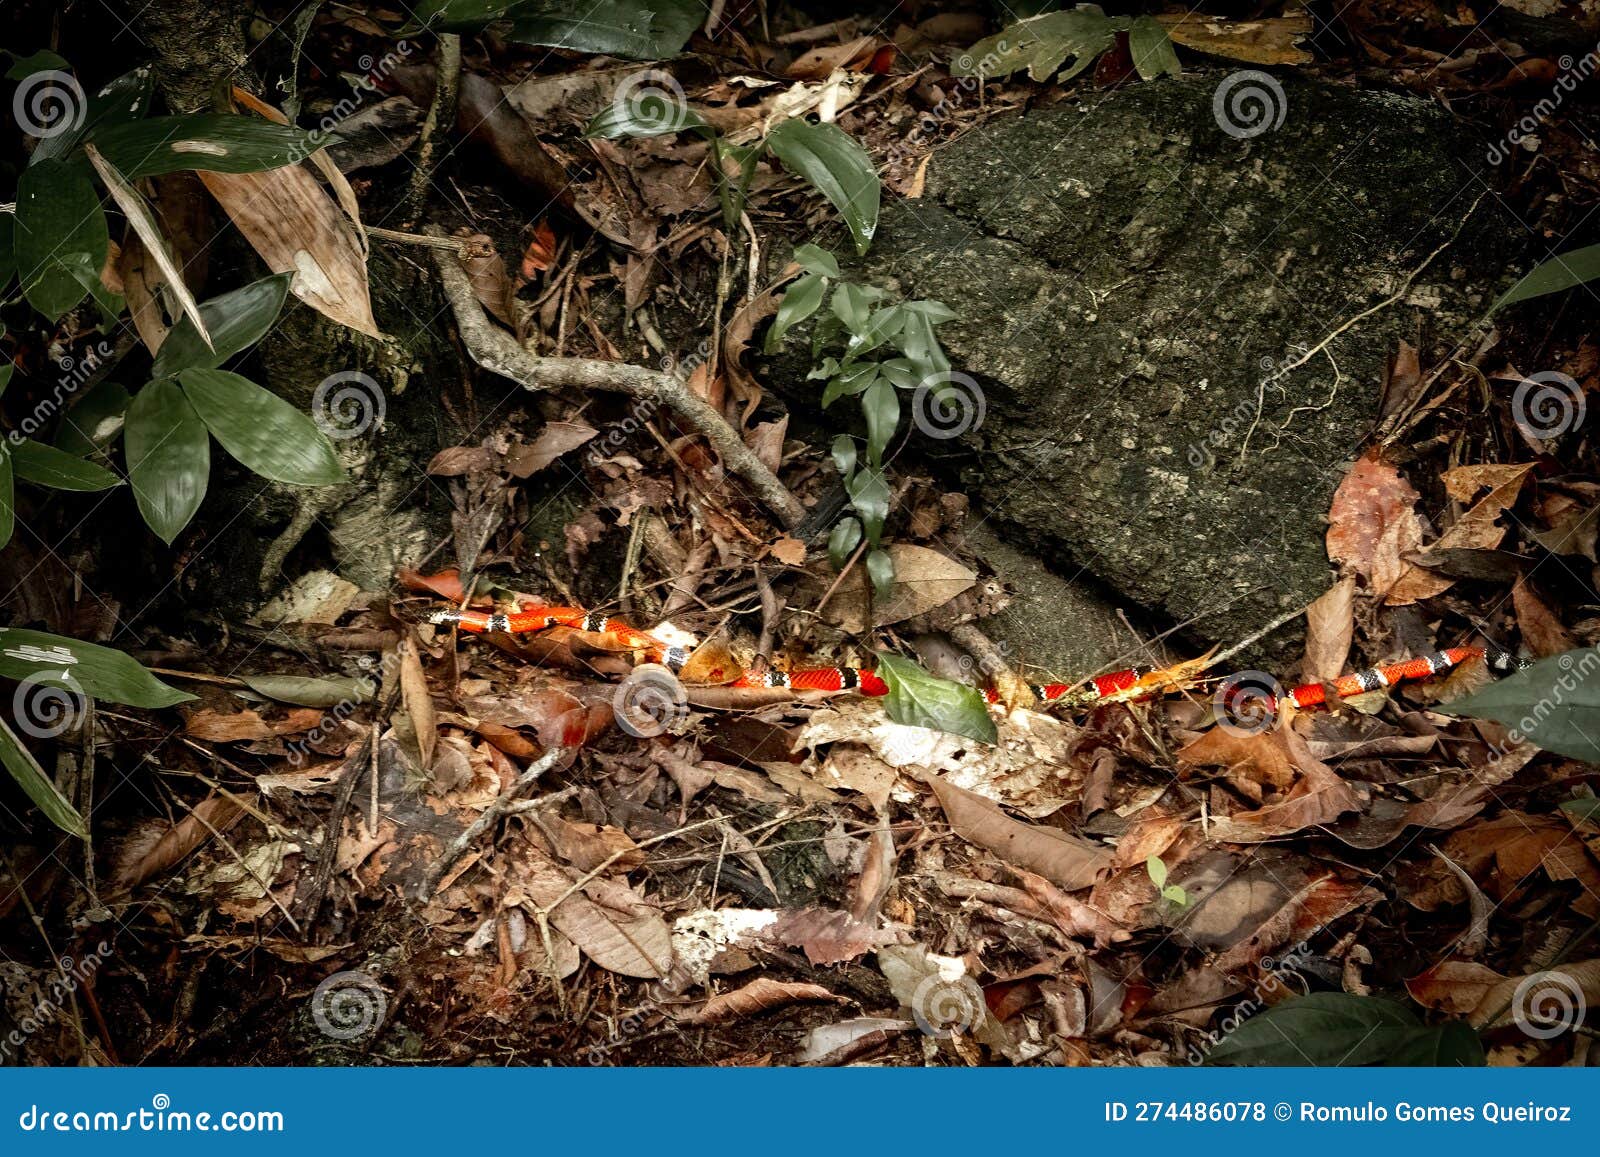 true coral snake on the mountain trail of 